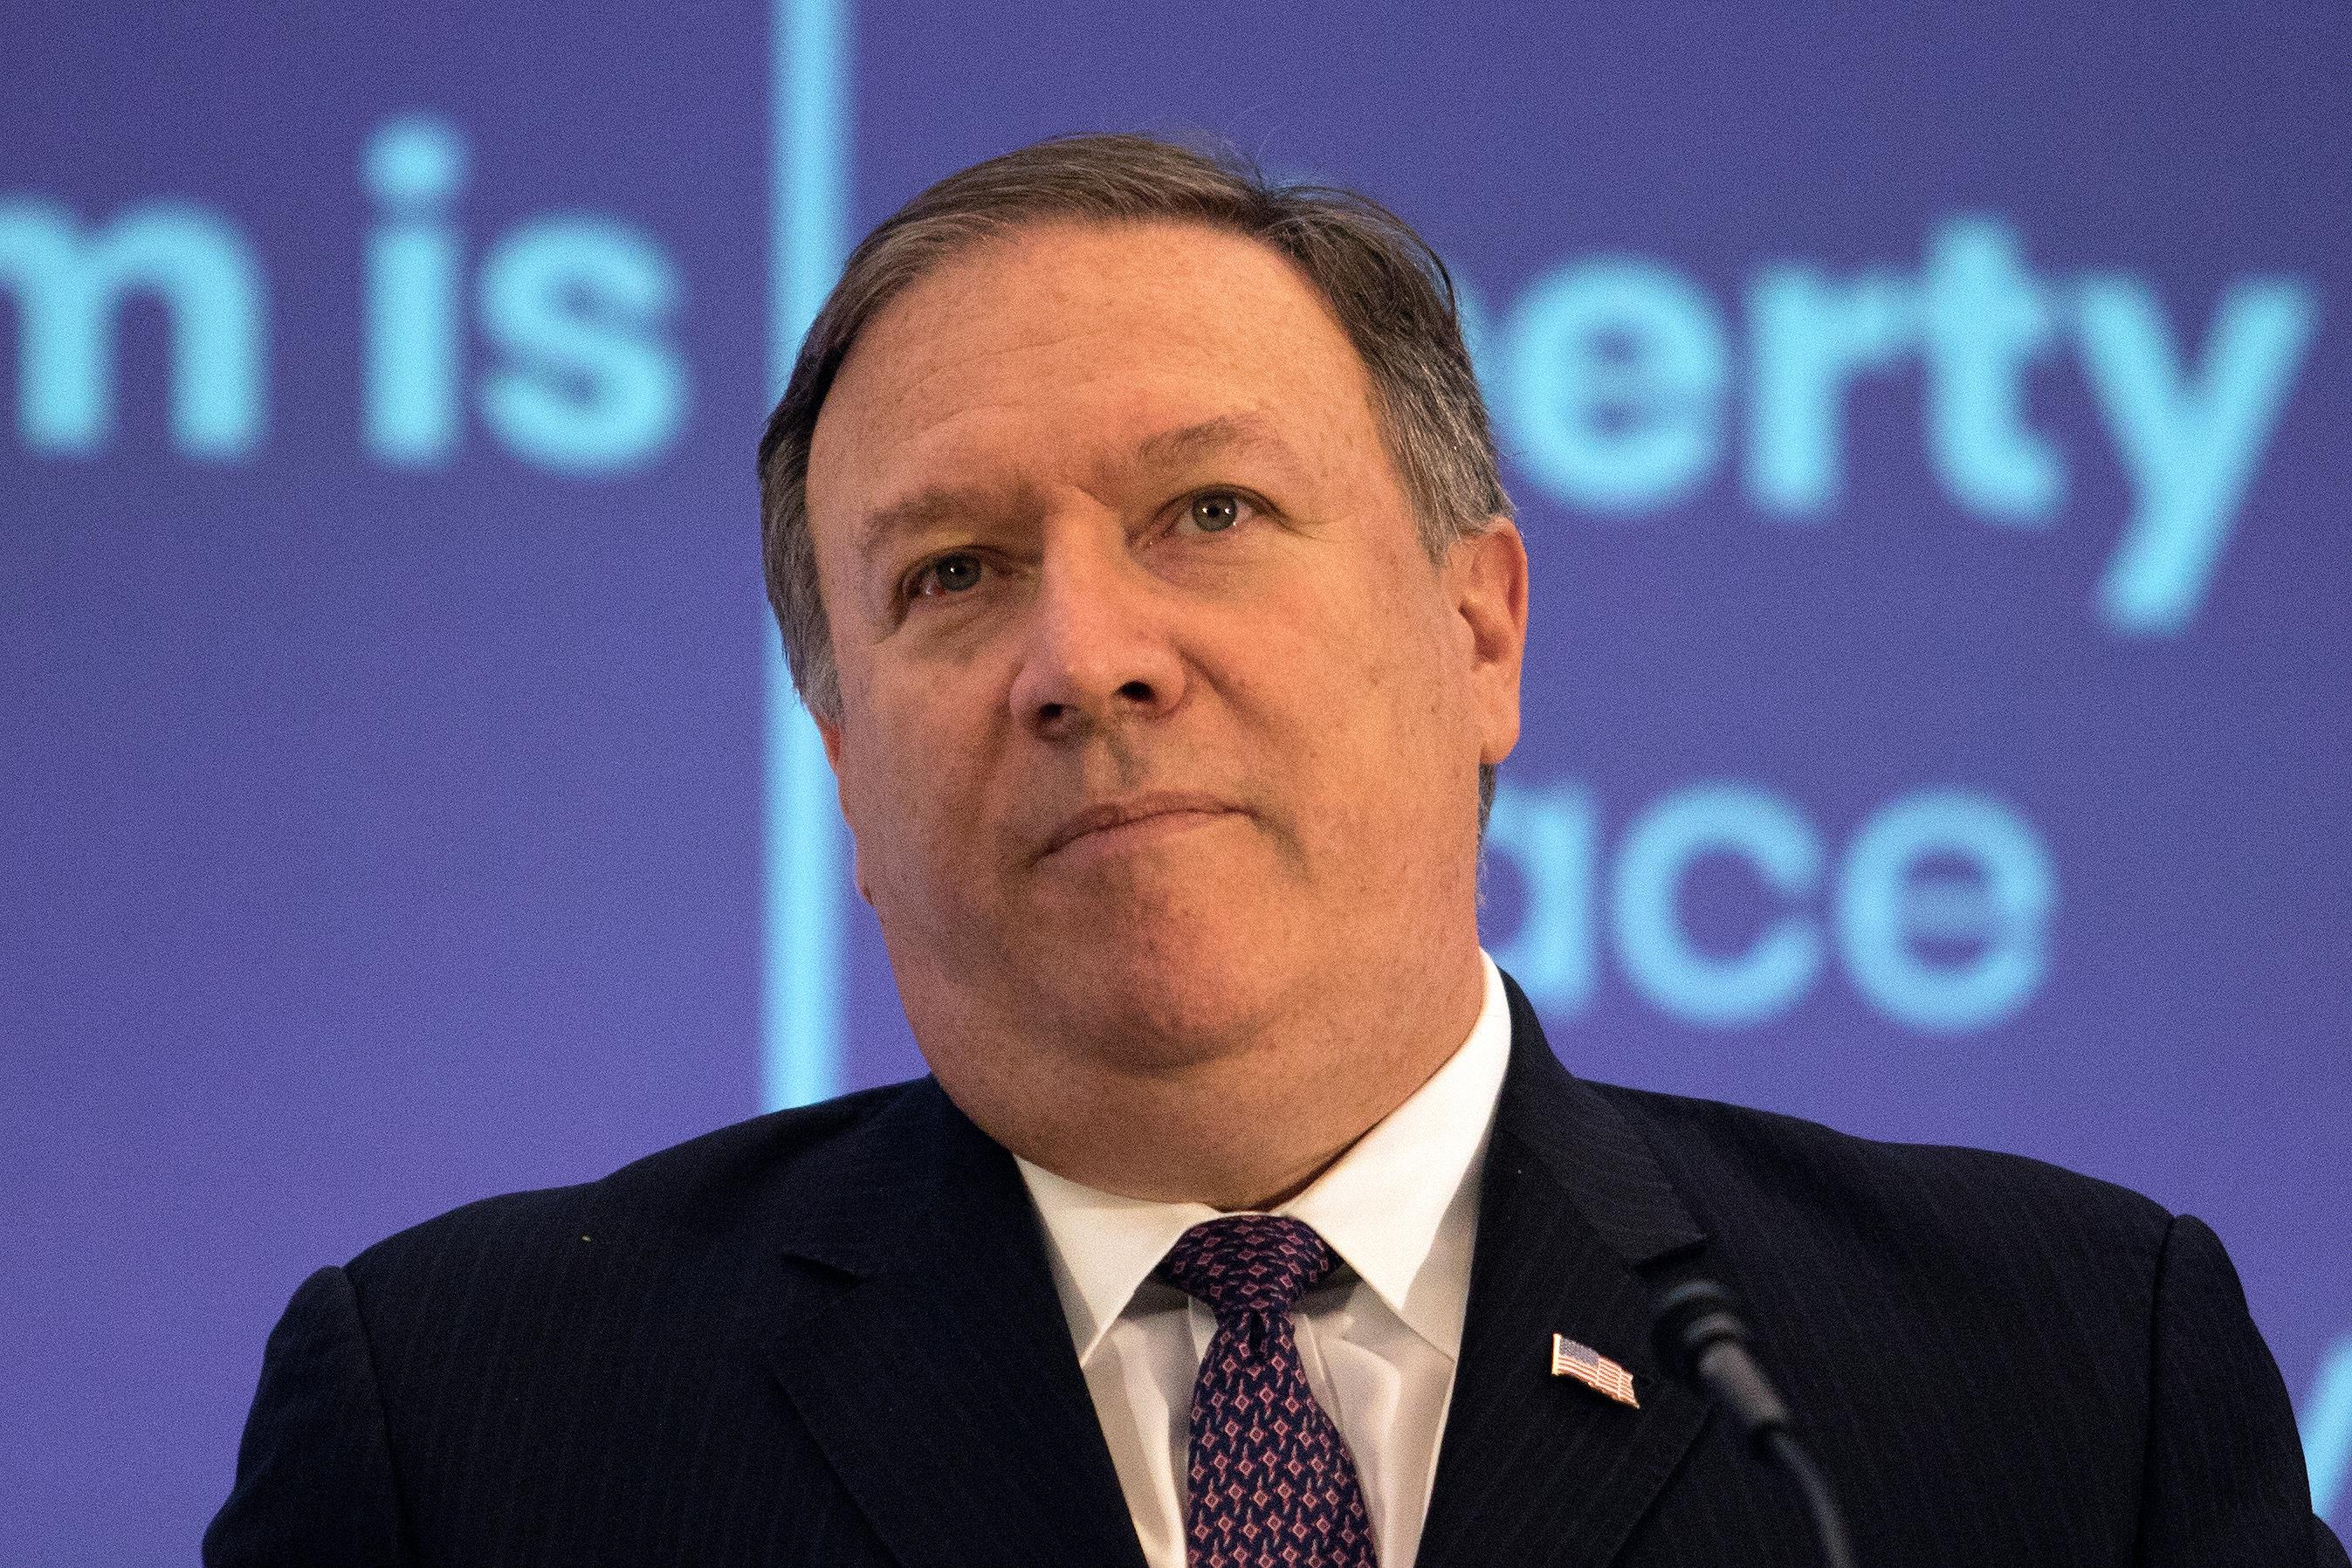 Pompeo says downing of Russian plane an 'unfortunate incident'